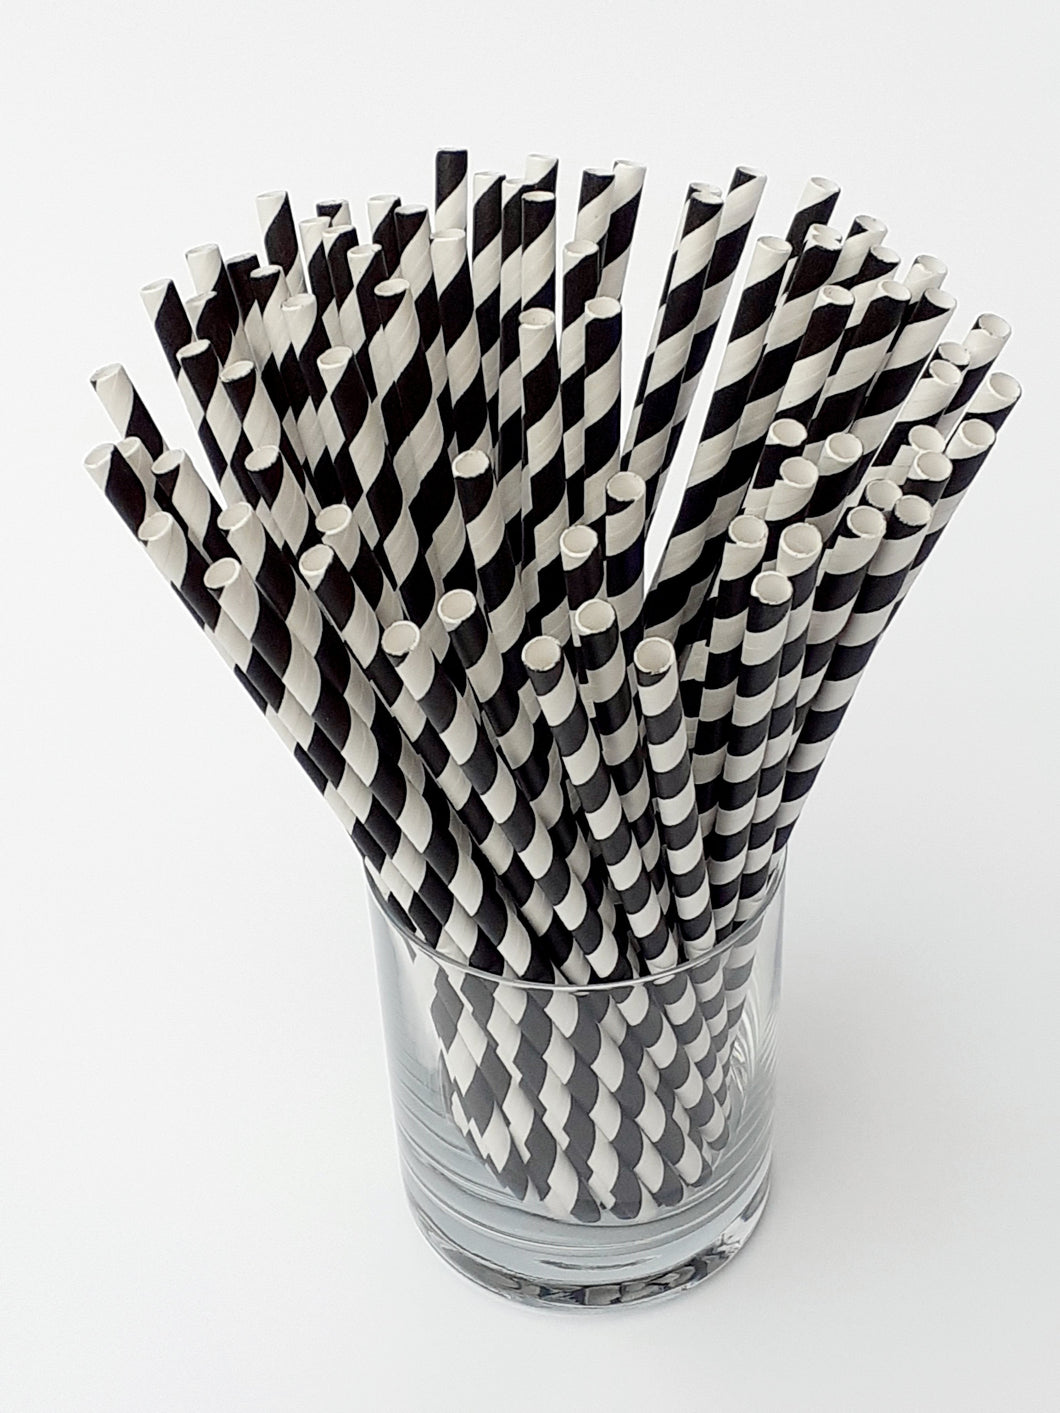 Black stripe paper straws made in UK. Our biodegradable eco friendly paper straws are recyclable with a low carbon footprint. Say no to plastic – our planet matters.